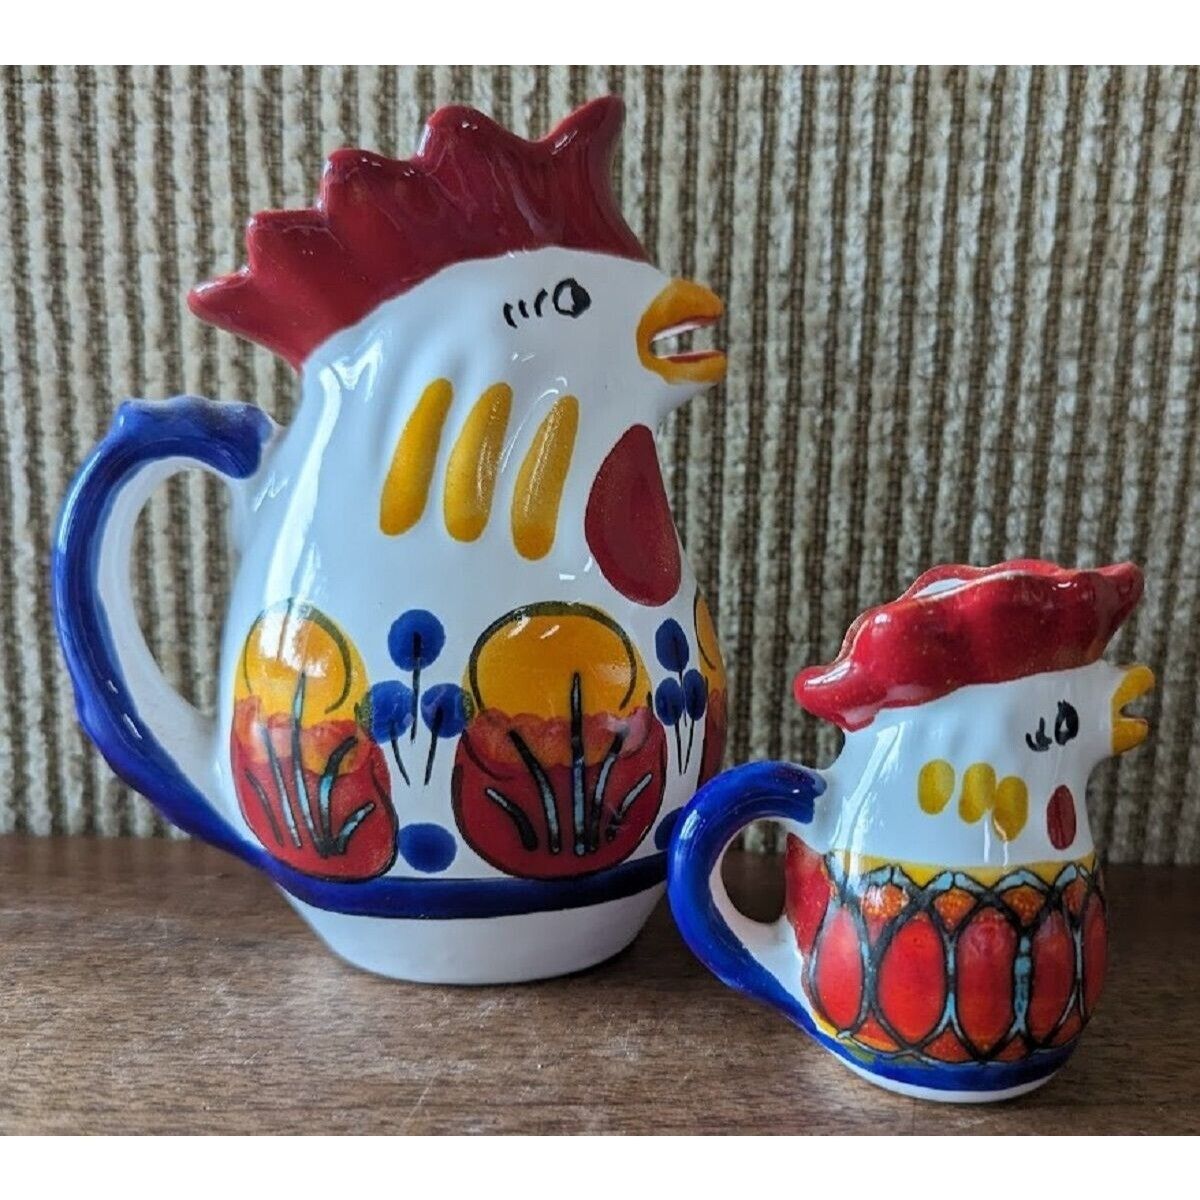 Vintage La Giara Chicken Rooster Pitchers, Hand Painted, Set of 2, Colorful, GUC